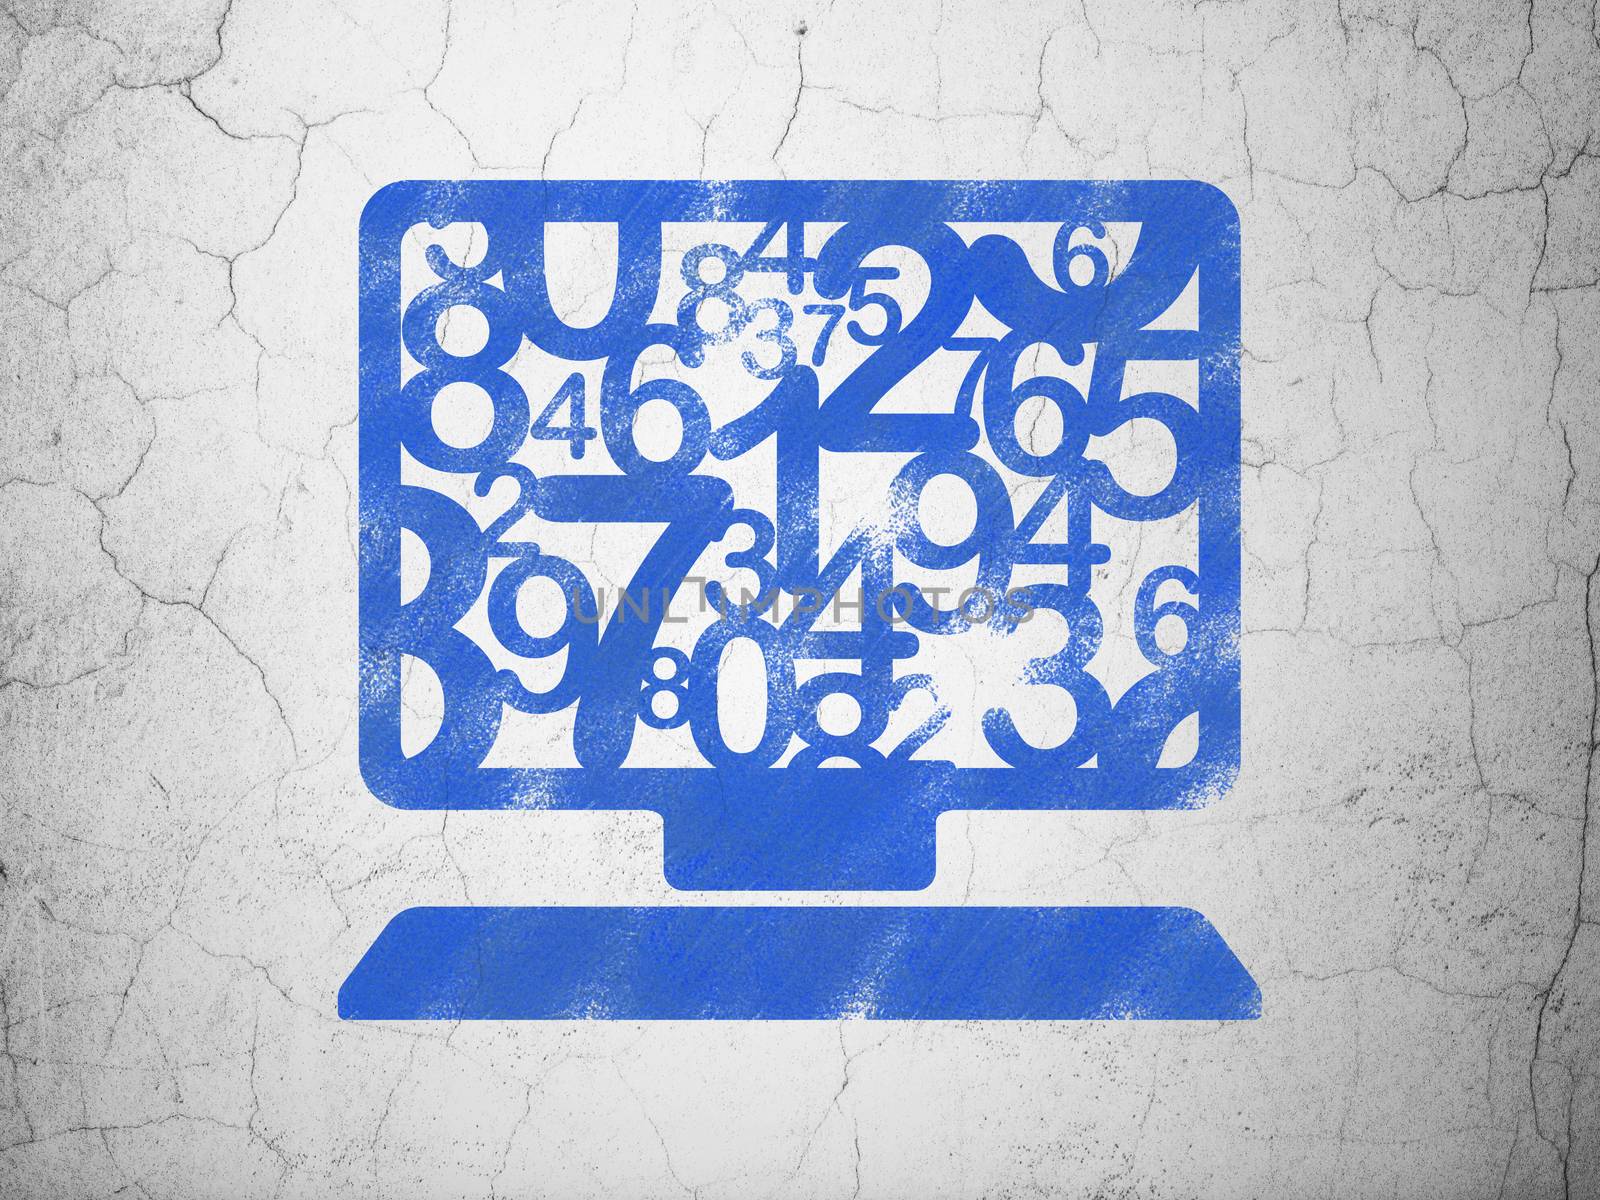 Studying concept: Blue Computer Pc on textured concrete wall background